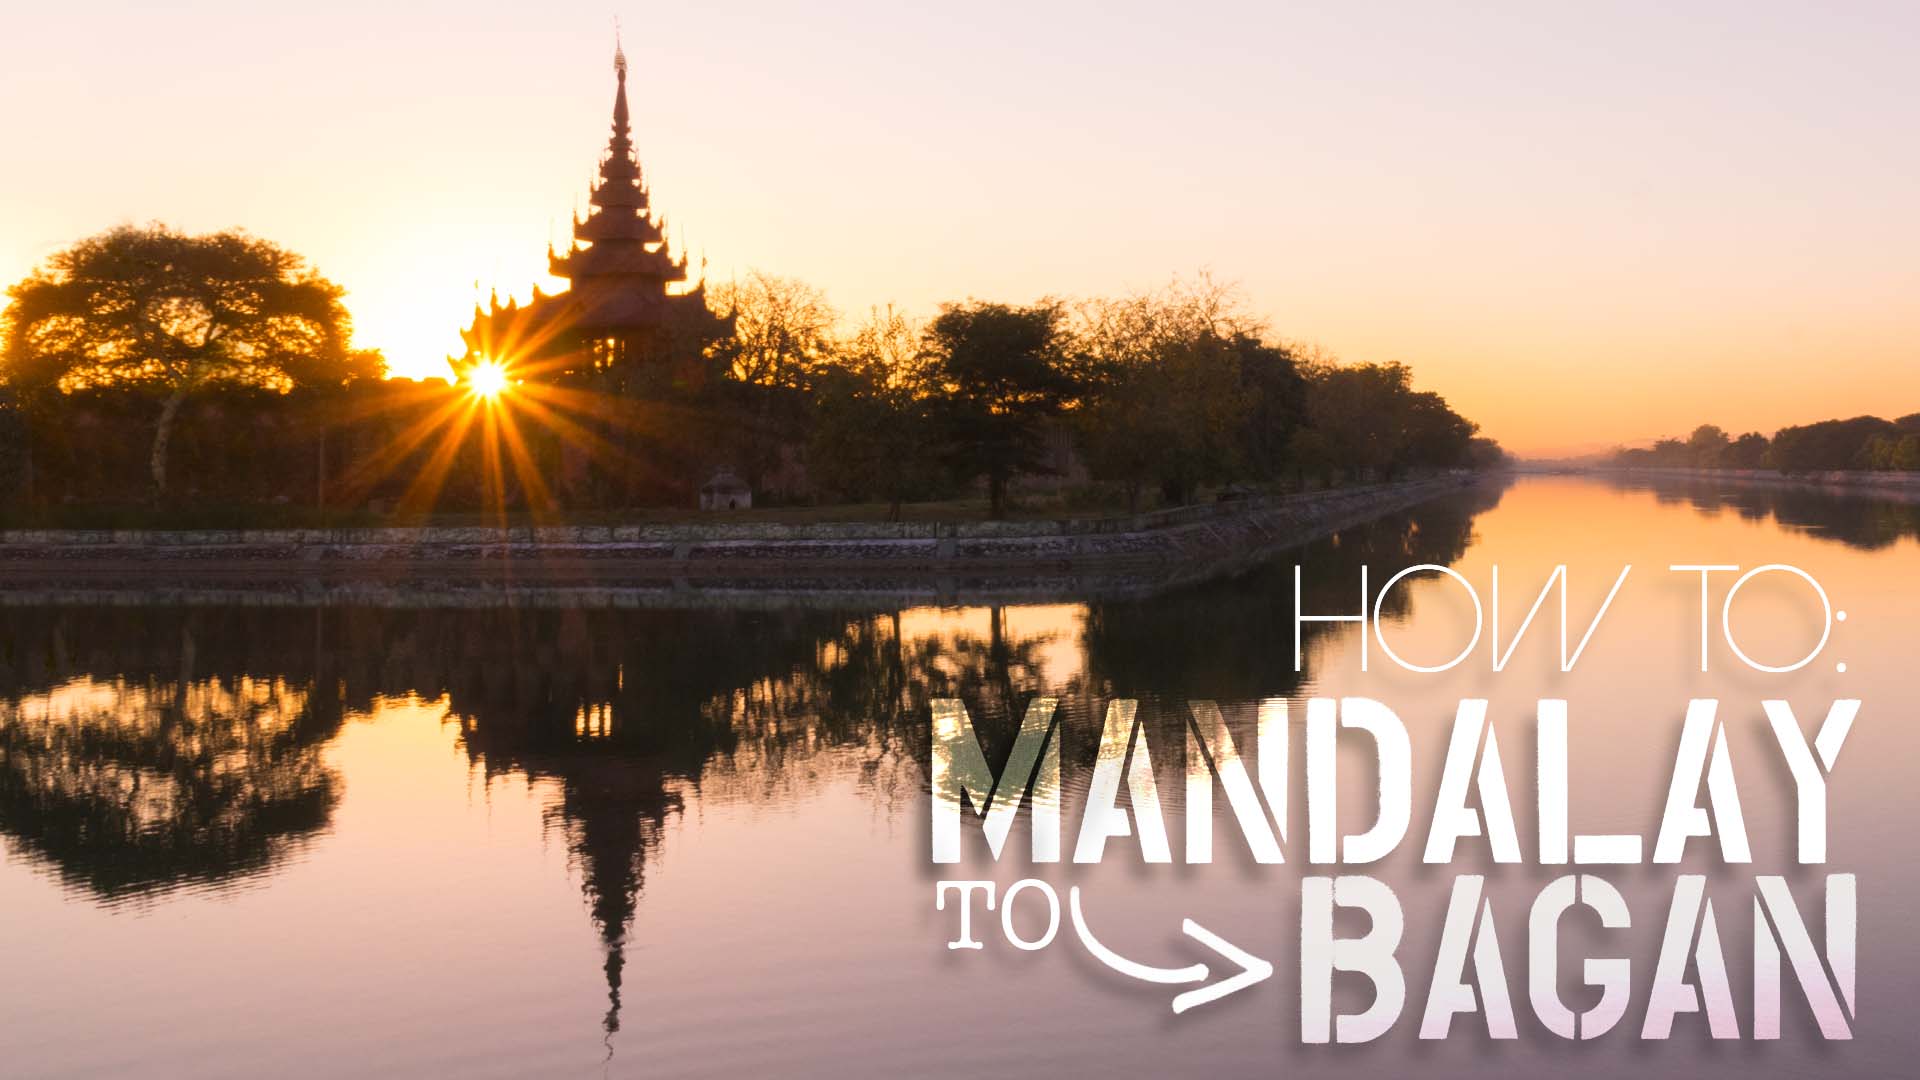 How To Get from Mandalay to Bagan – Boat, Bus, Train, Plane, Car